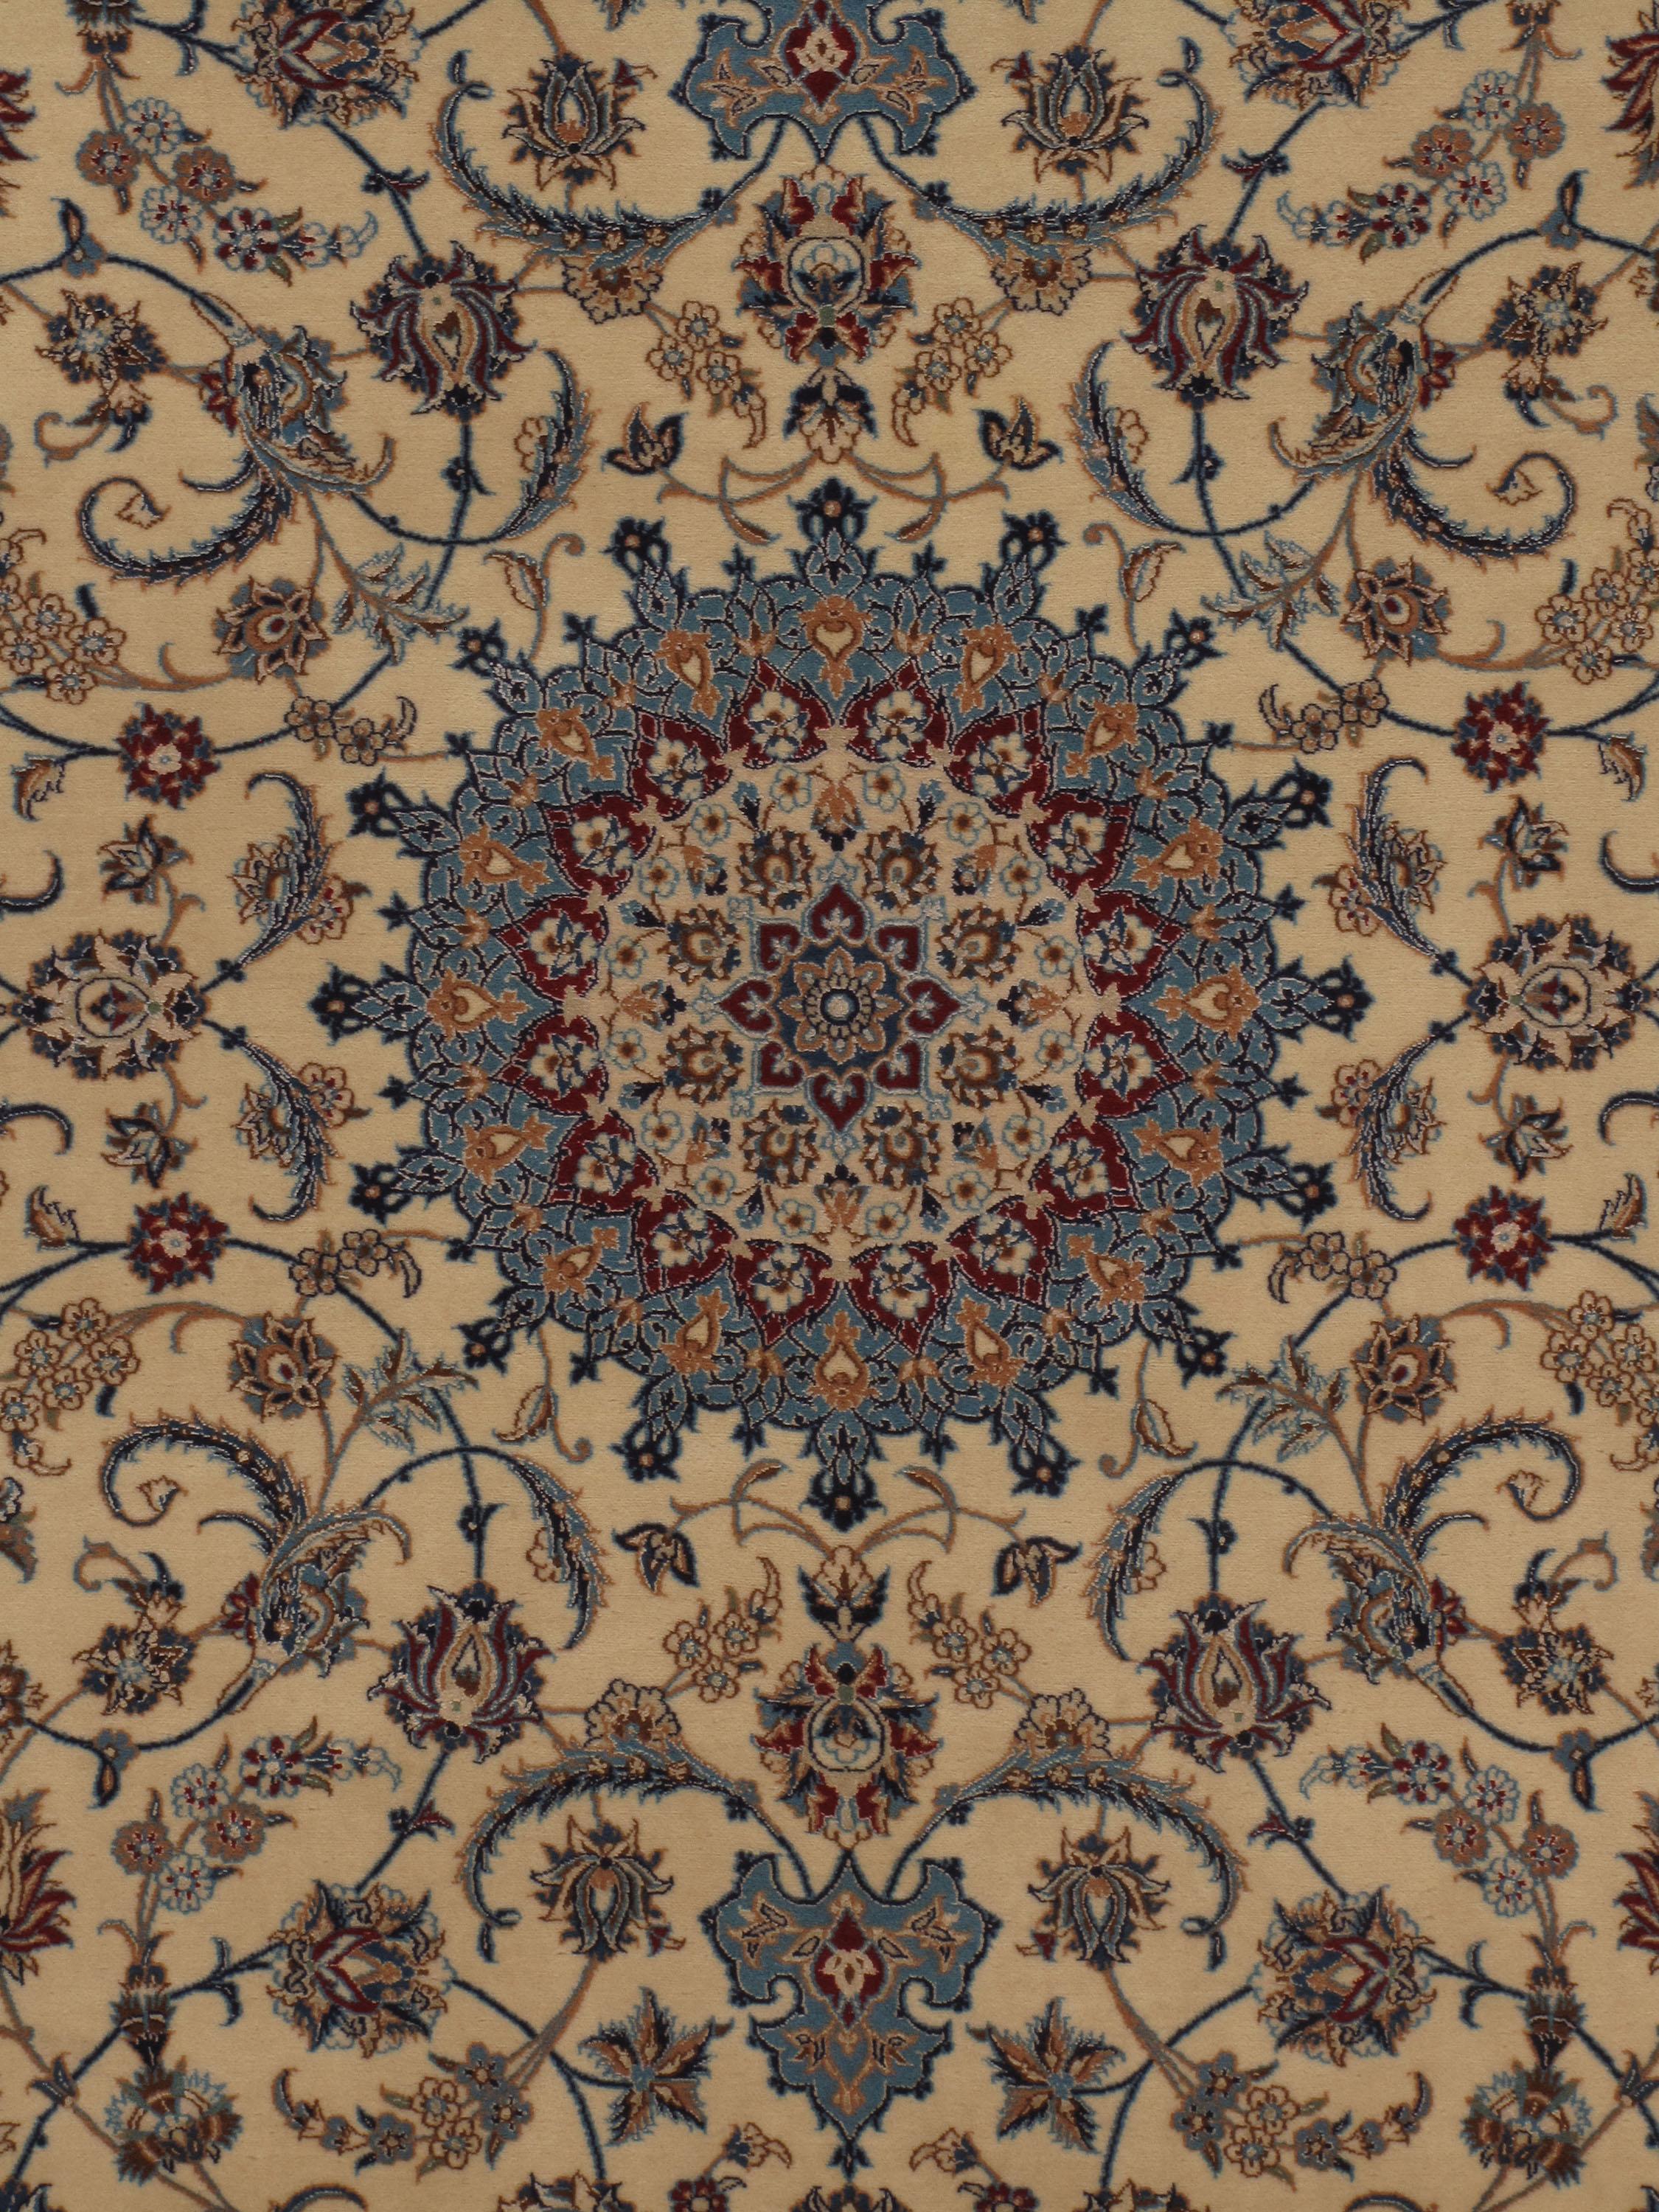 Vintage Persian wool & silk Nain rug 4' x 6'. Finely woven in a combination of wool & silk with intricately ultra fine patterns to create a classically beautiful rug. The soft coloring allows you to enjoy details without overbearing the room.